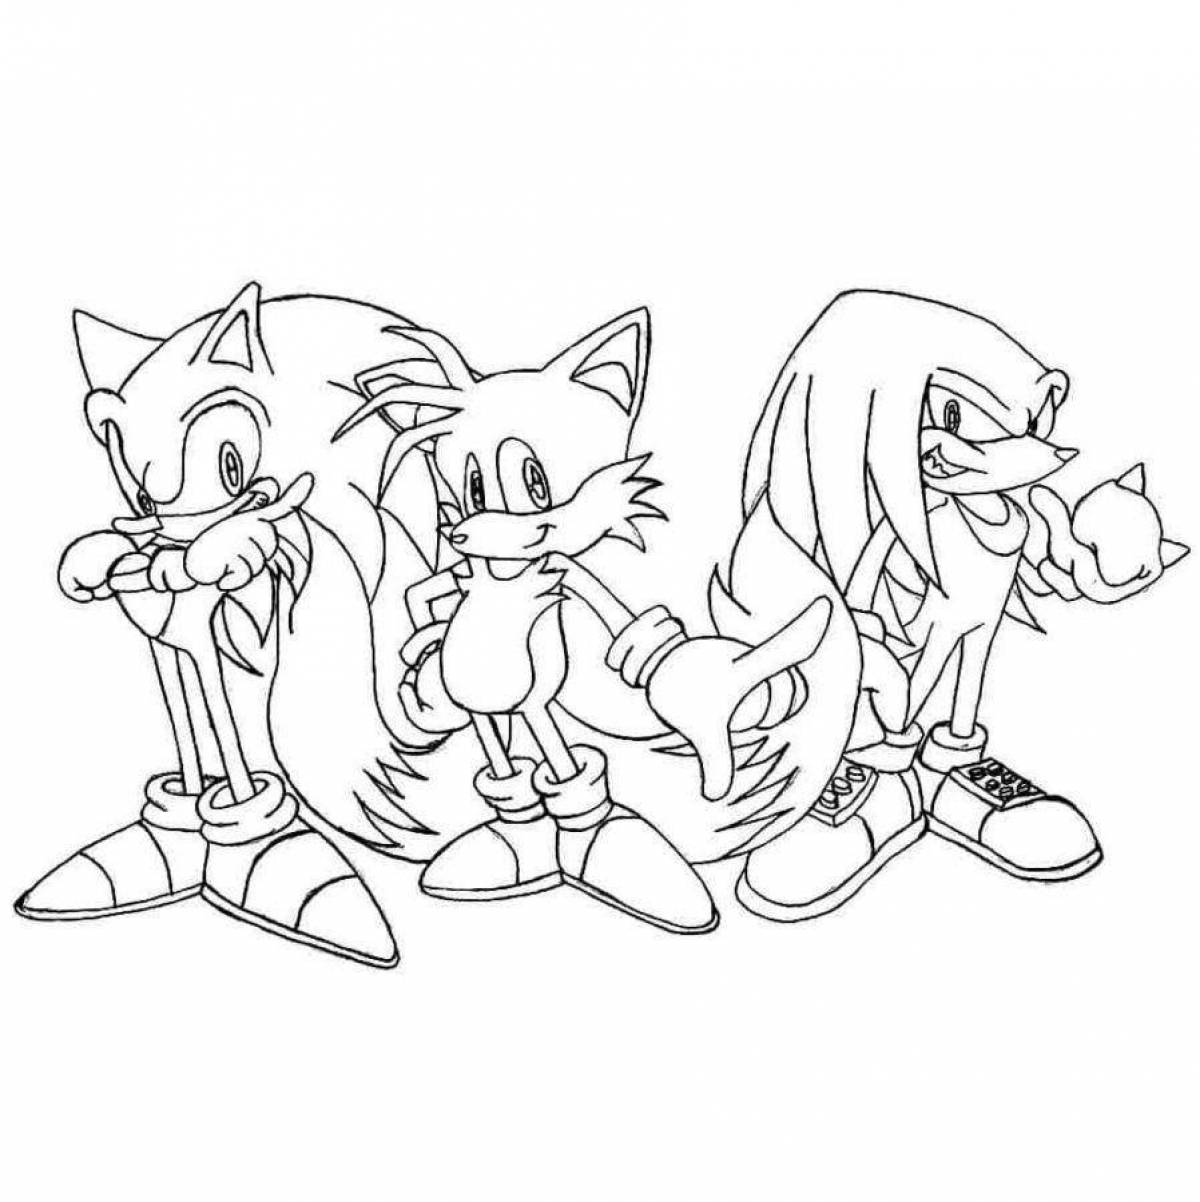 Great sonic knuckles coloring book